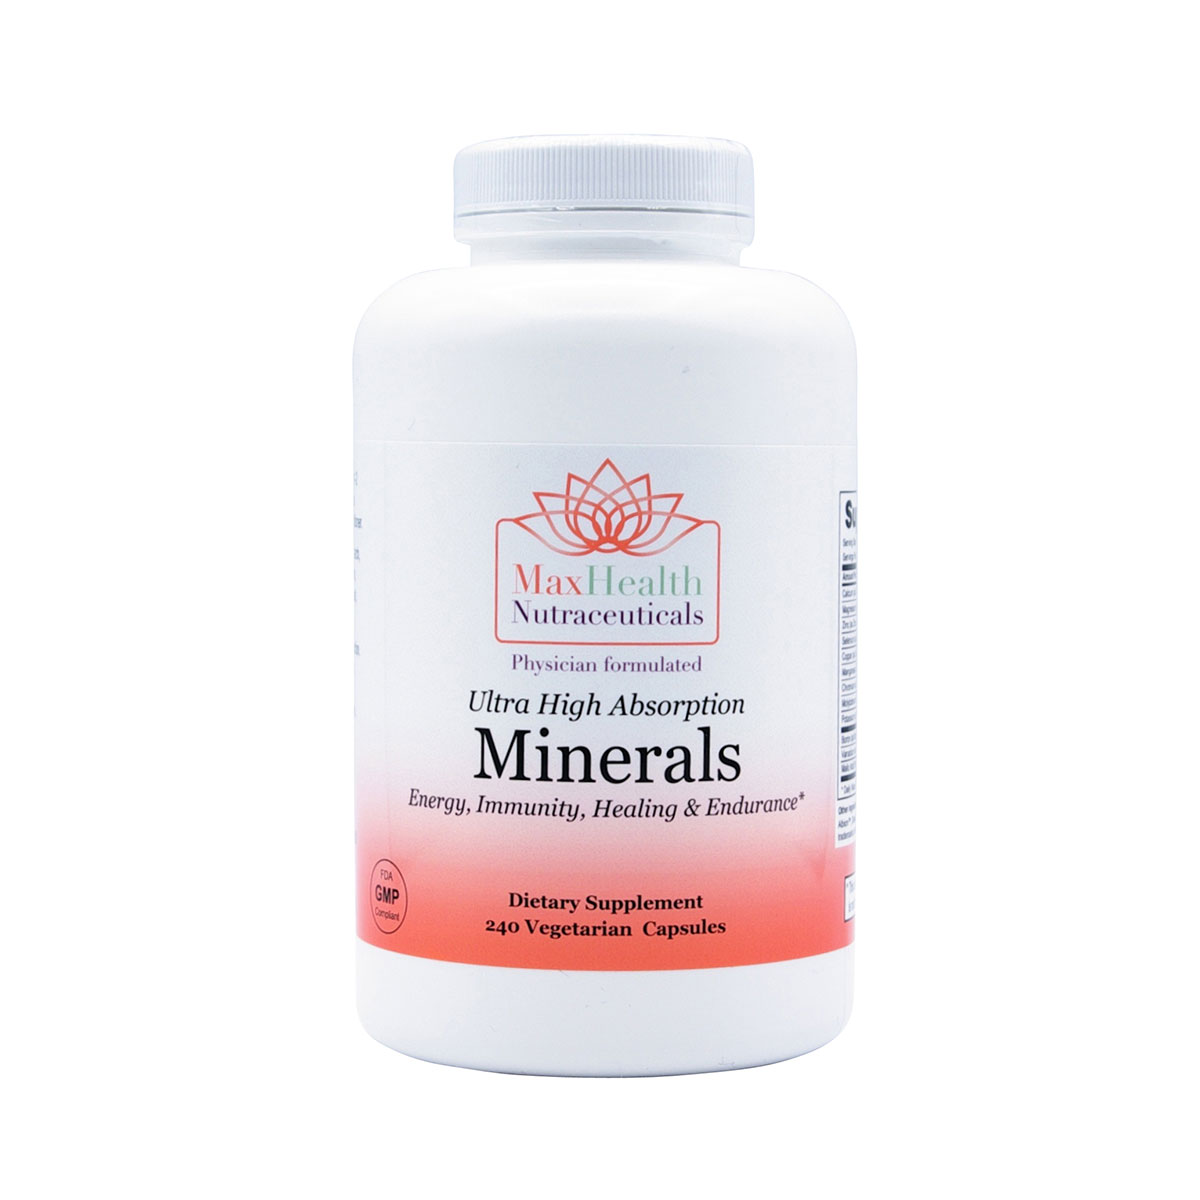 11Ultra High Absorption Minerals 240 Capsules